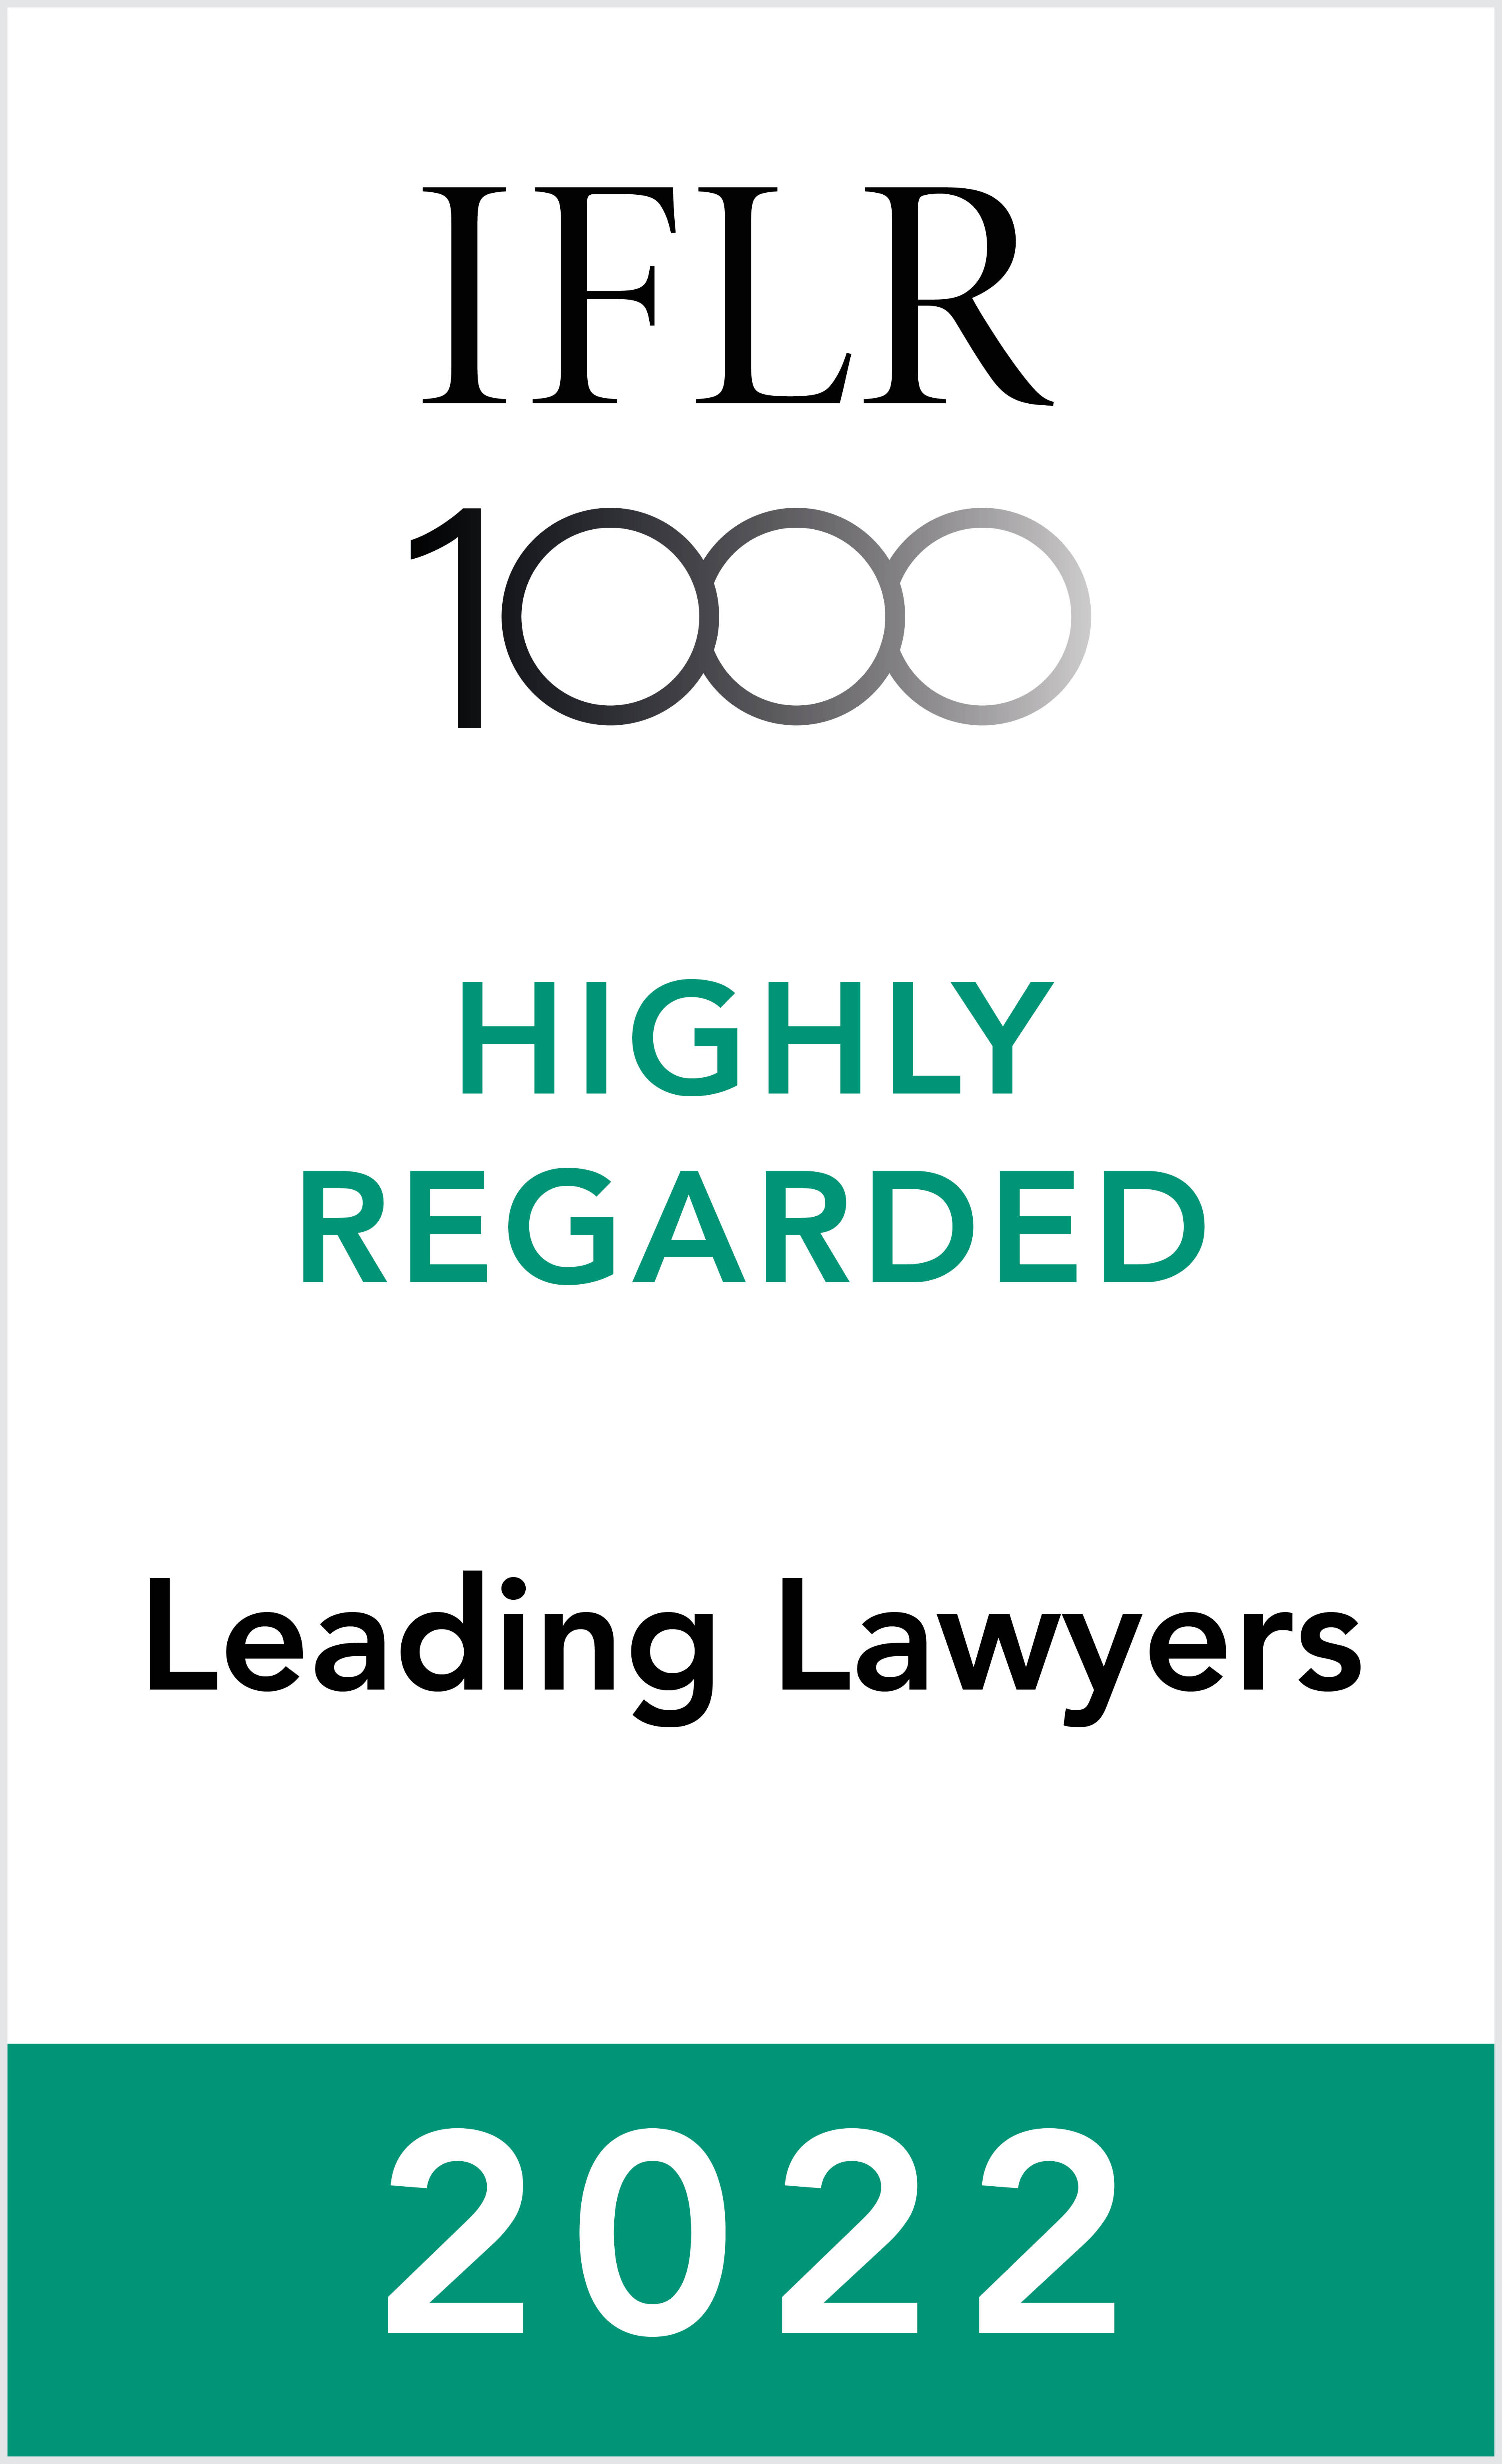 Our Managing Partner Rossana Chu has continuously been recognized as a “Highly Regarded” leading lawyer by IFLR1000 2022-23 edition